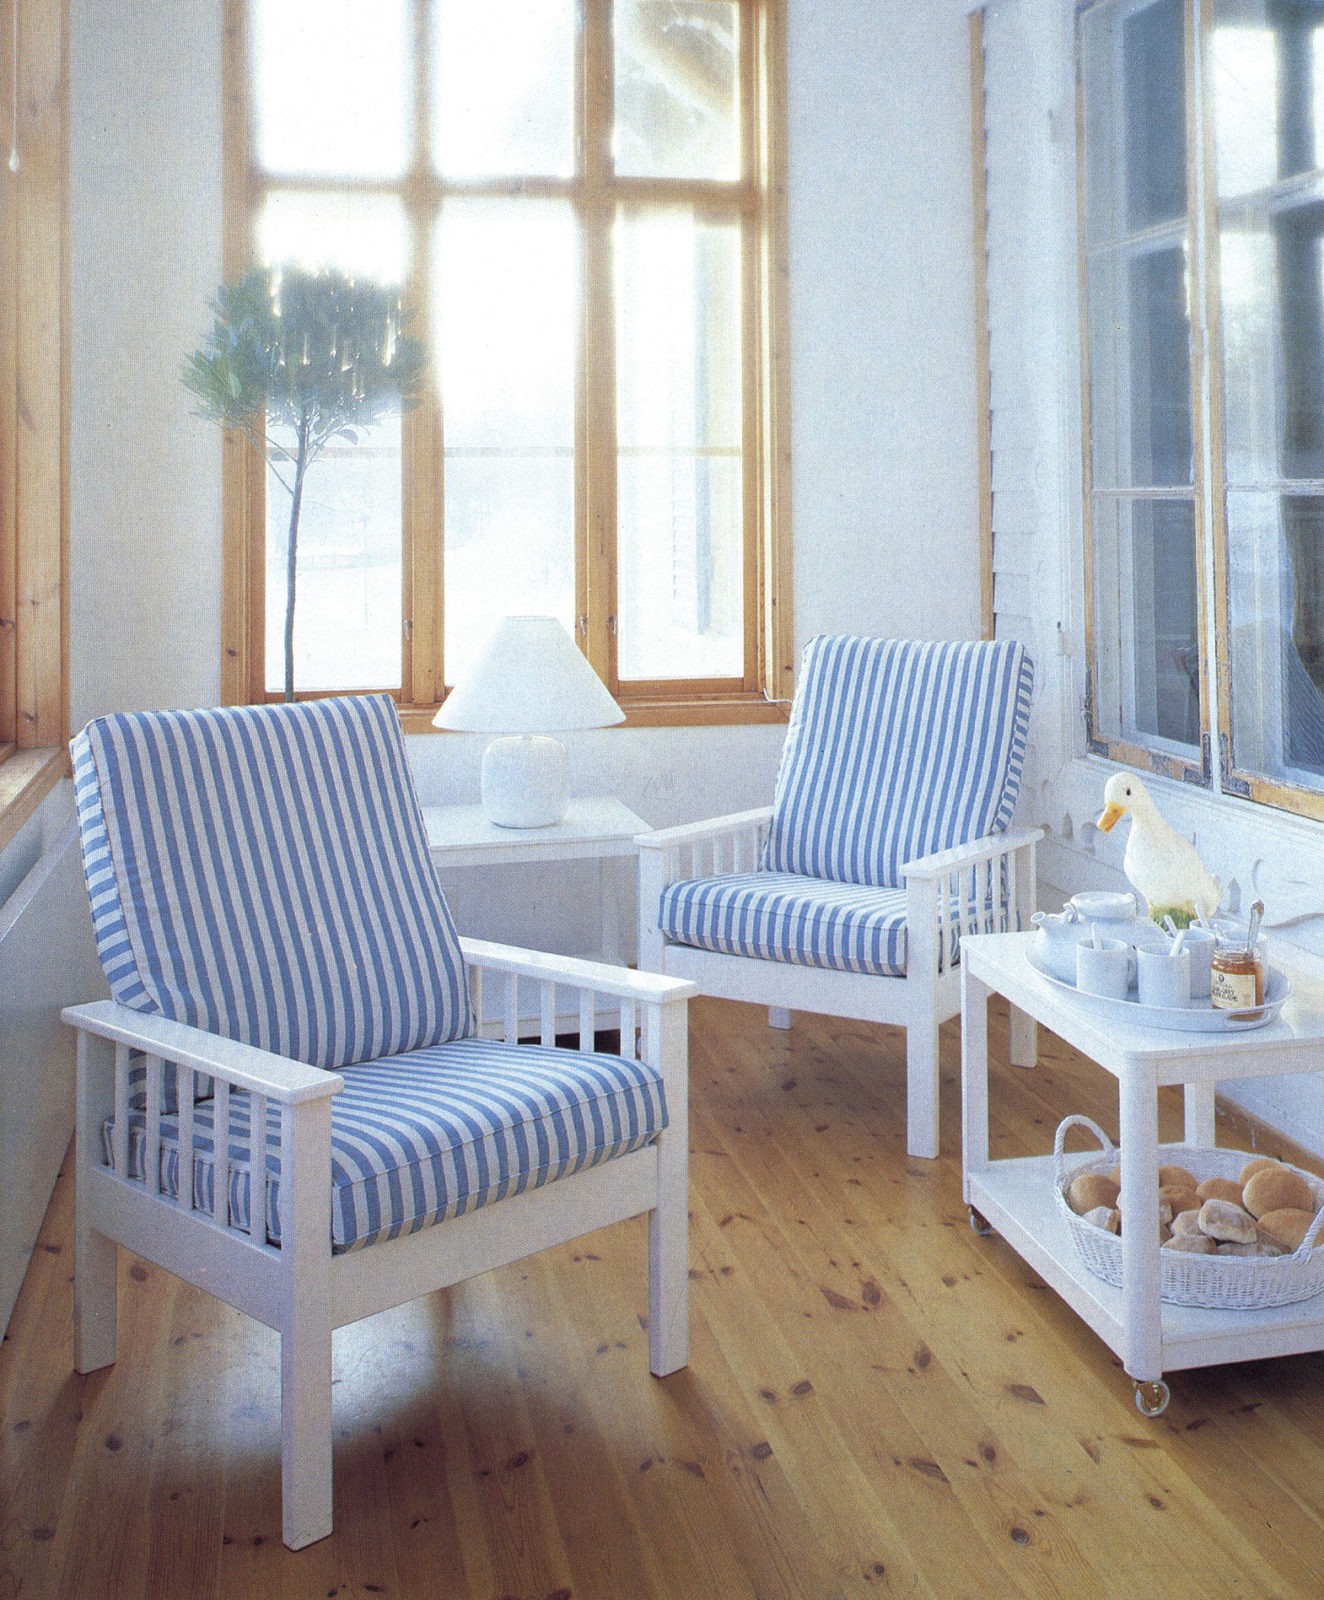 Light room with big windows, hardwood floors, two armchairs with blue and white striped cushions.